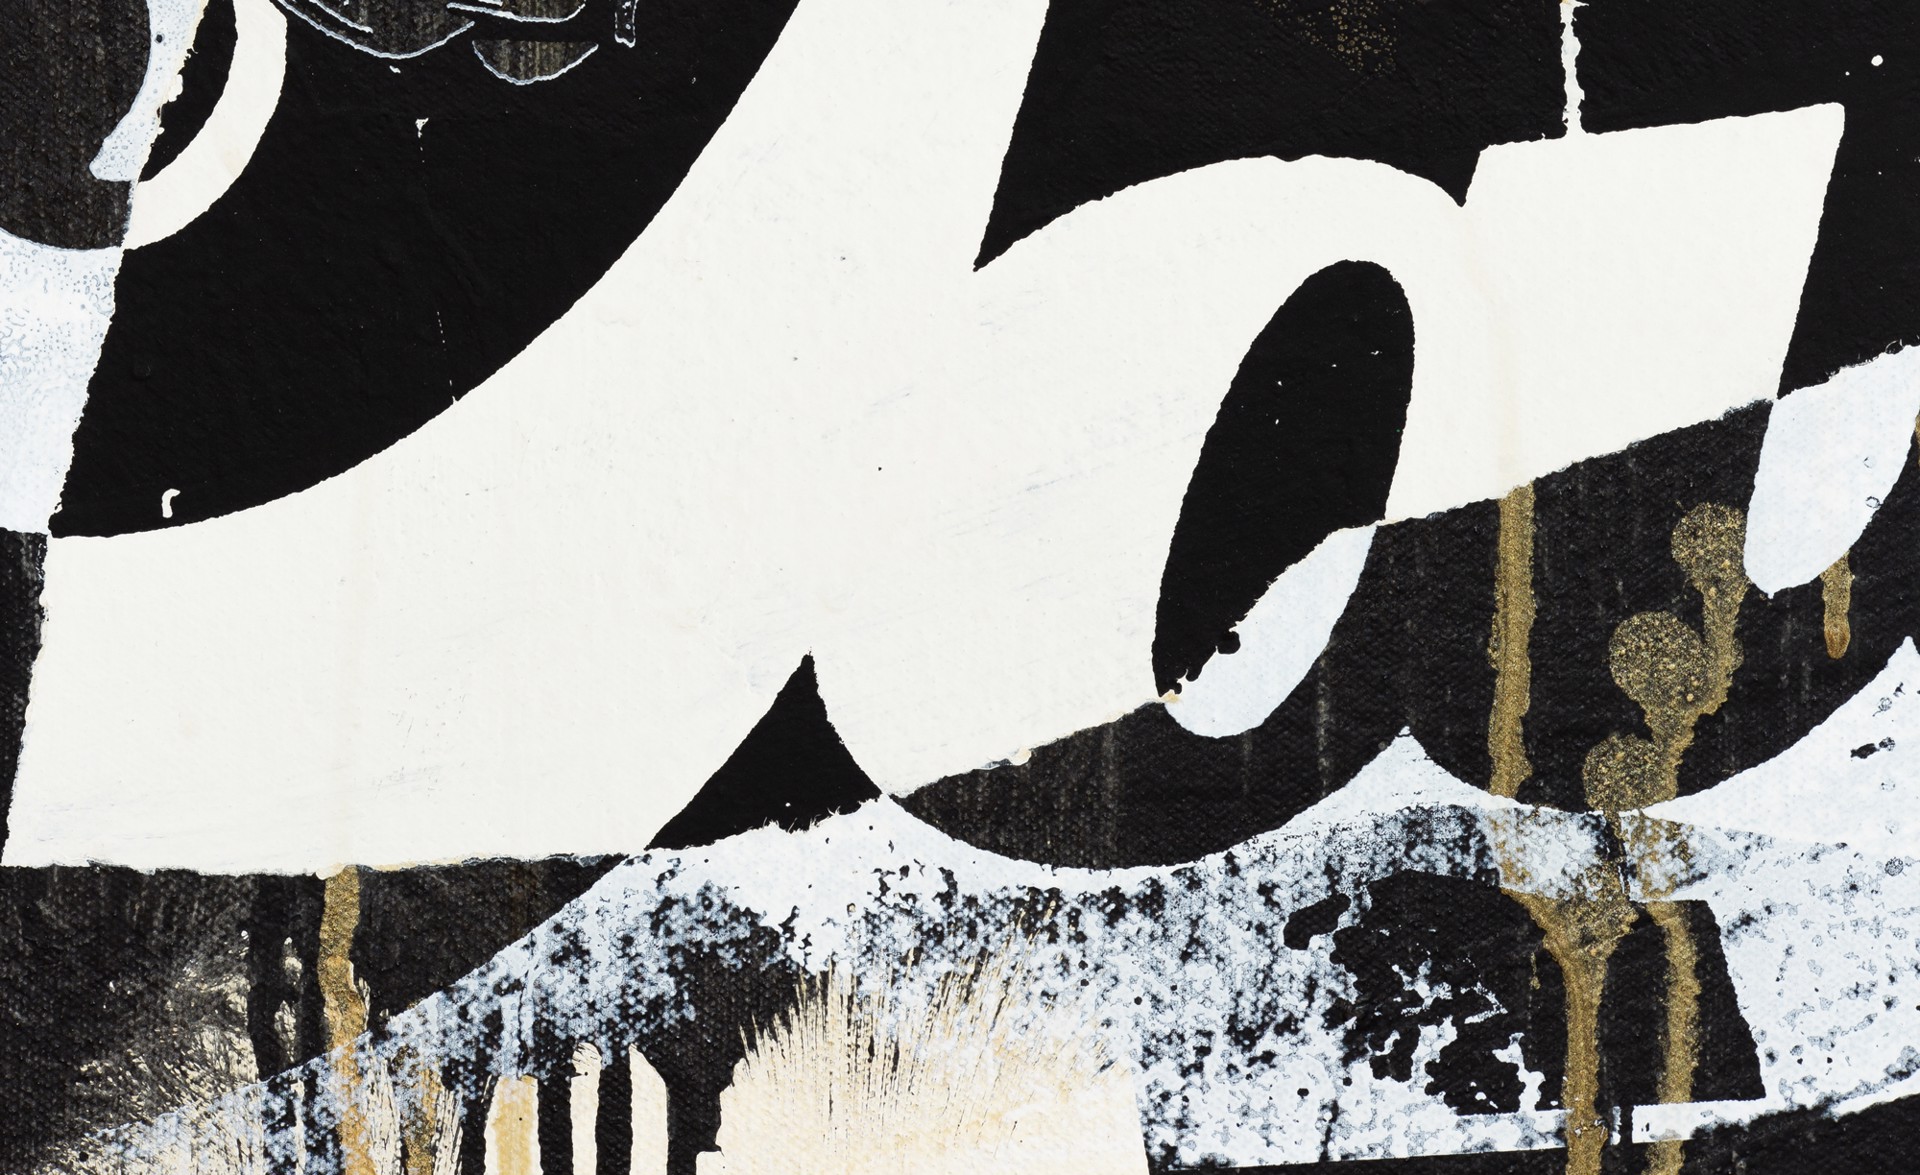 London Black and Gold No. 2 by FAILE